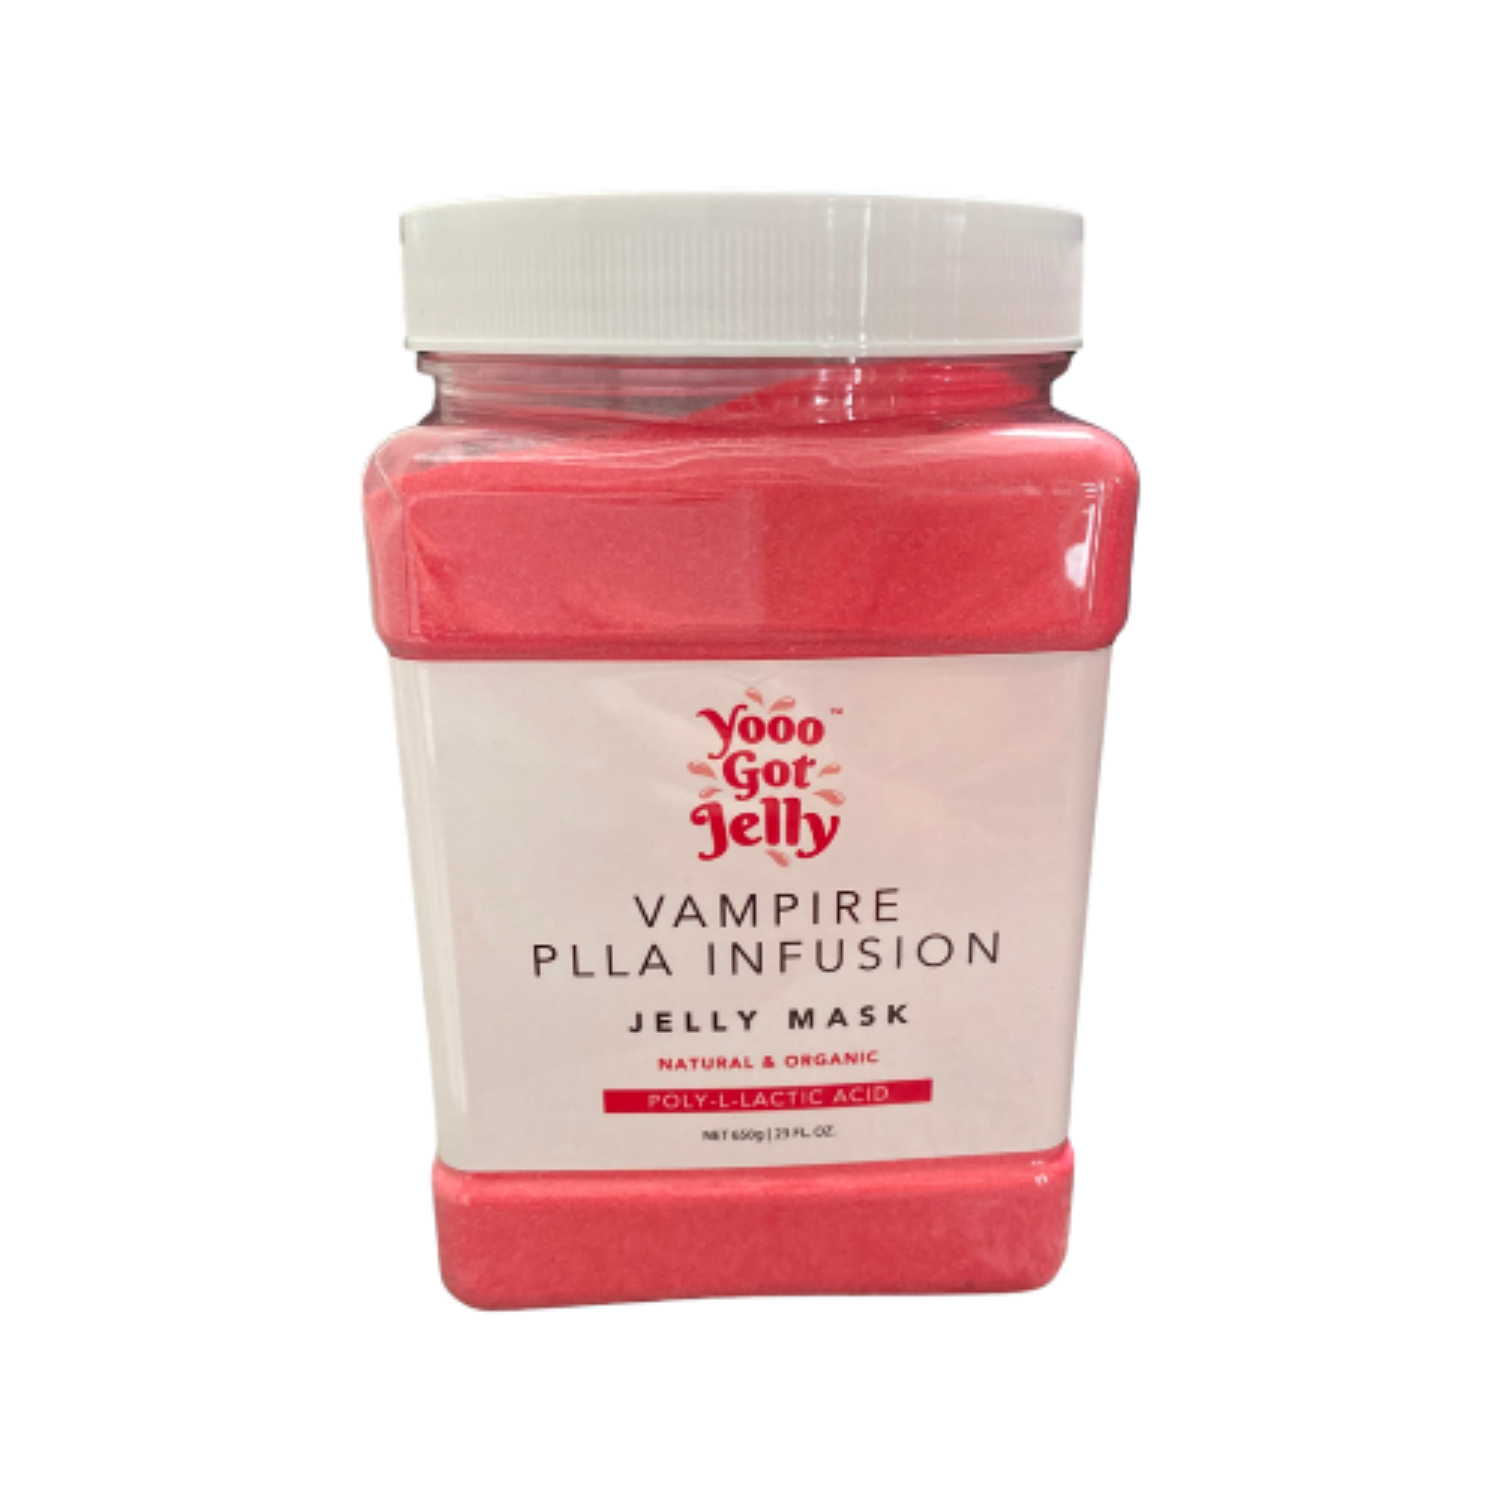 VAMPIRE PLLA INFUSSION JELLY MASK - Improves Collagen and Plumps Skin